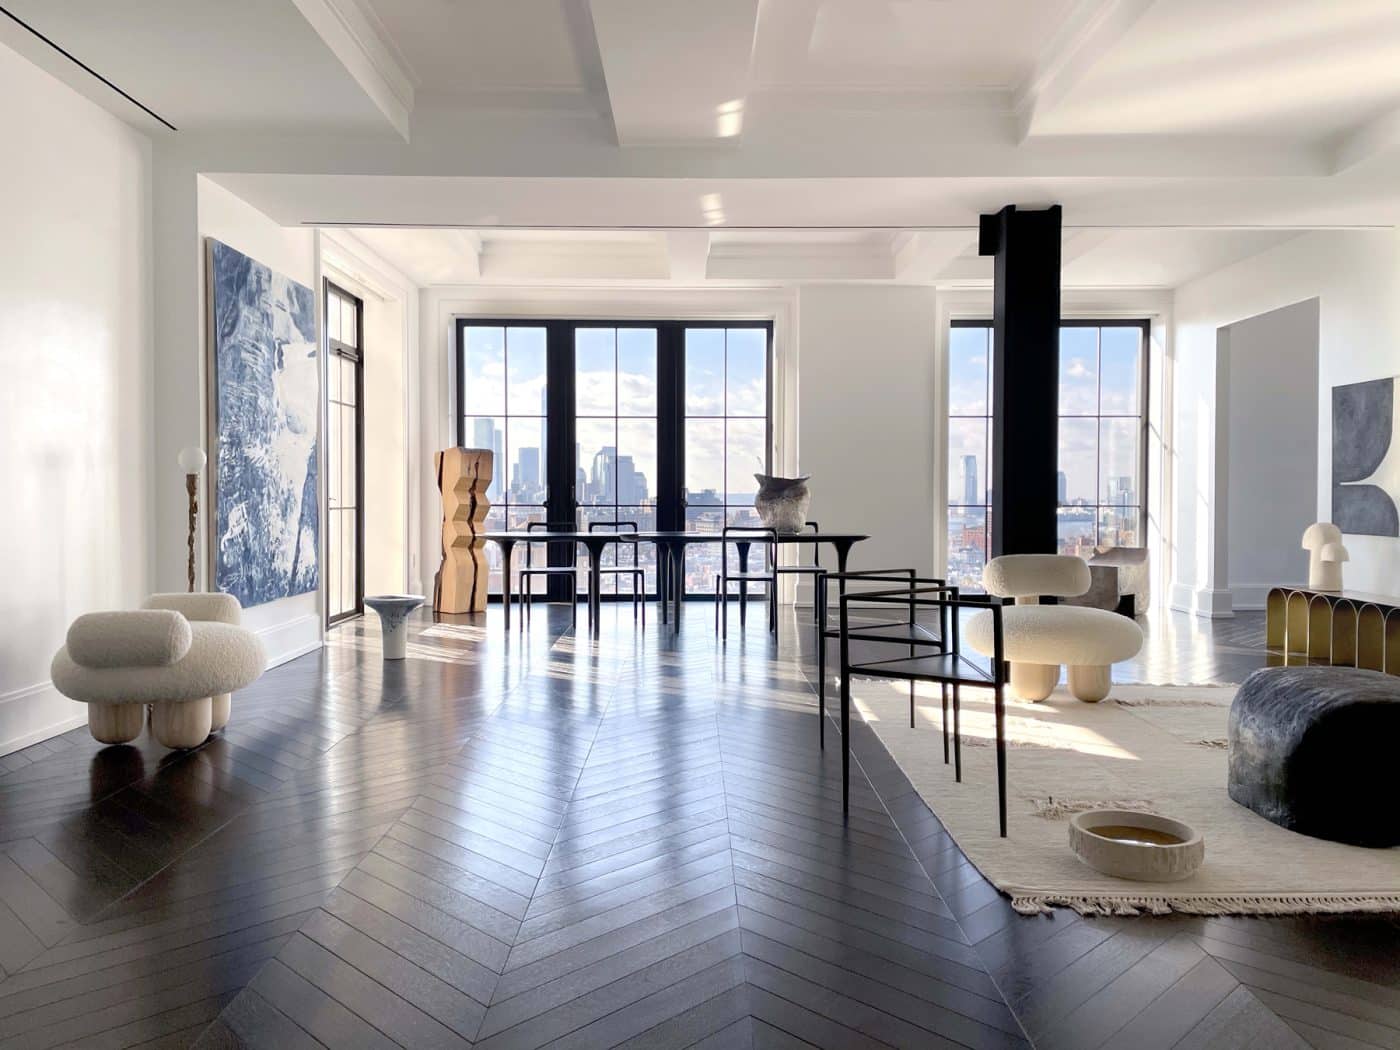 Galerie Philia's show of contemporary furniture in a duplex apartment in New York's Walker Tower